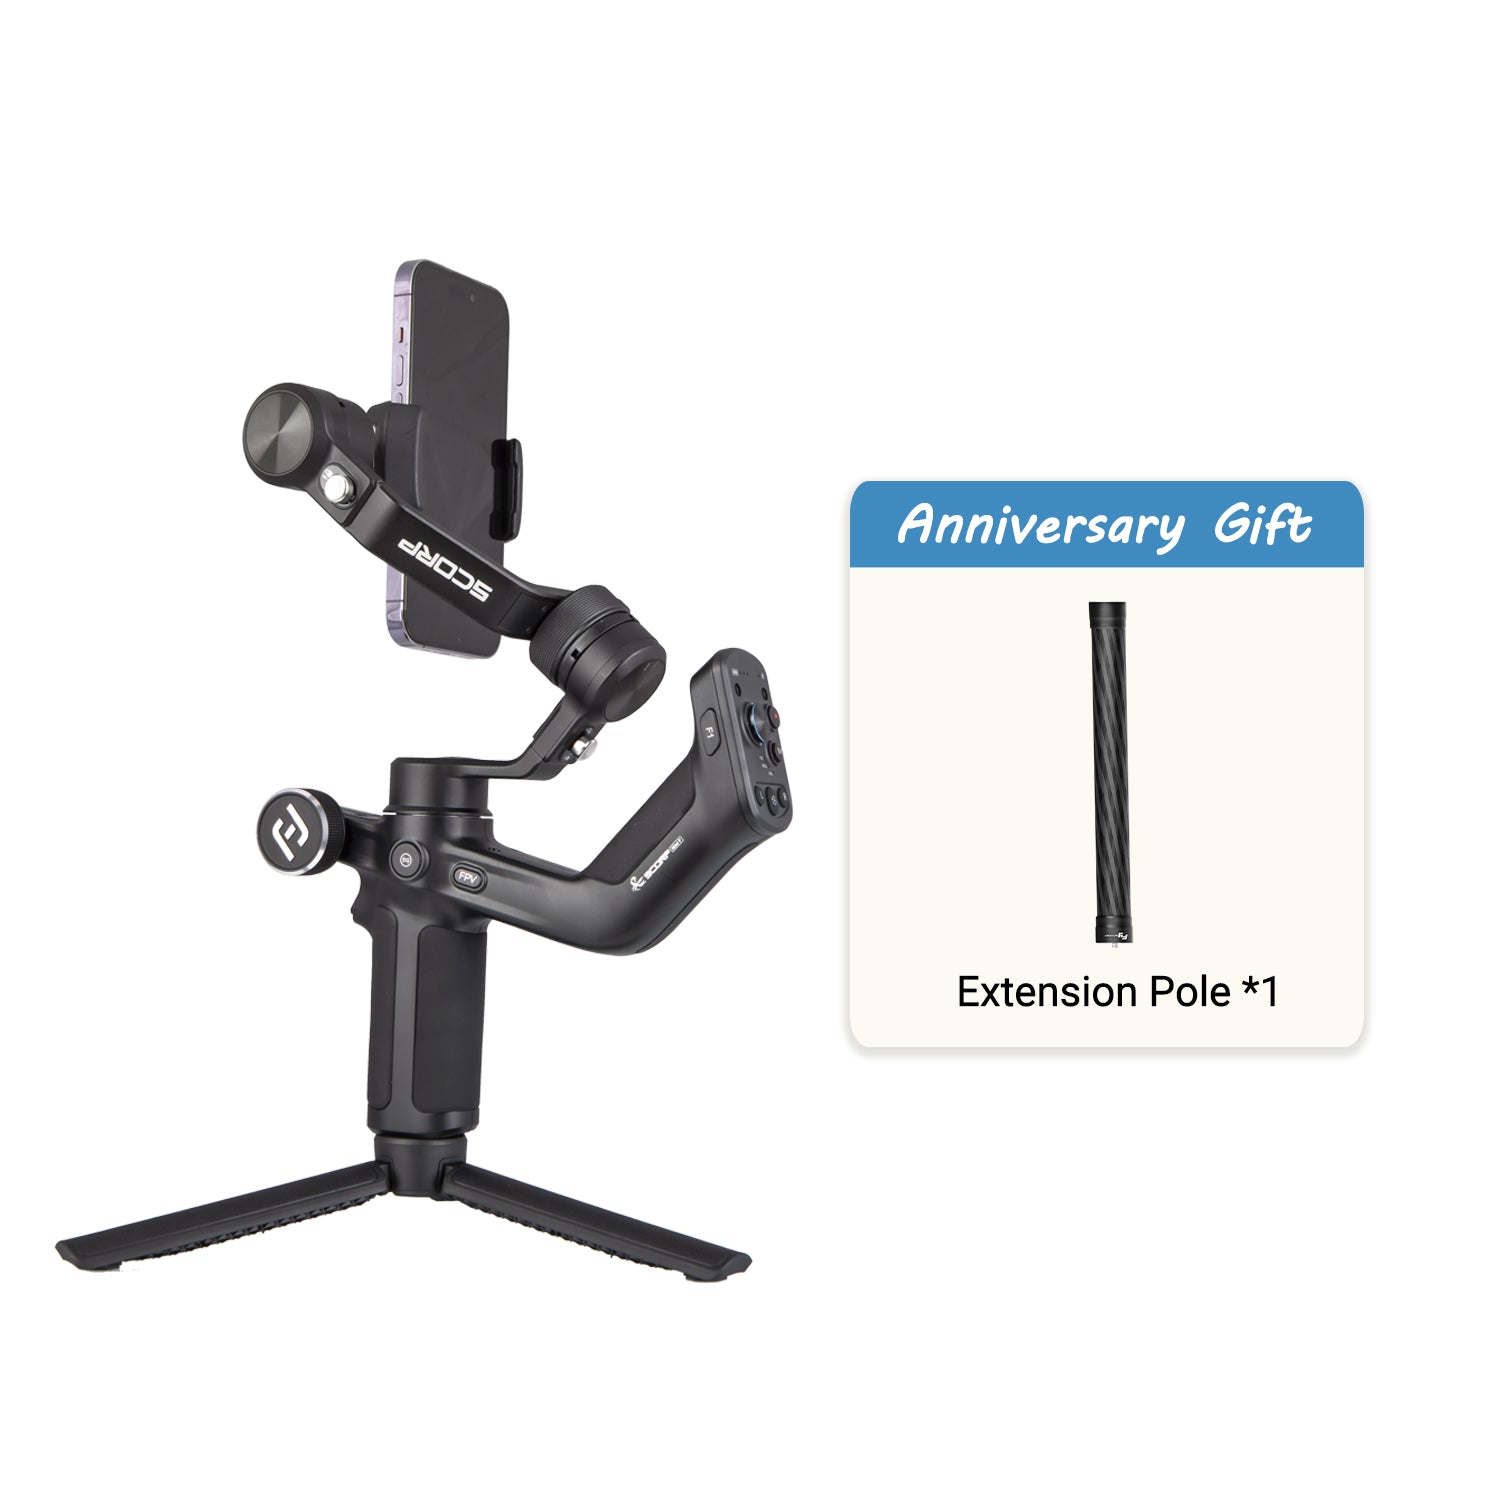 Buy SCORP Mini-P Get Free Extension Pole - Anniversary Special Offer